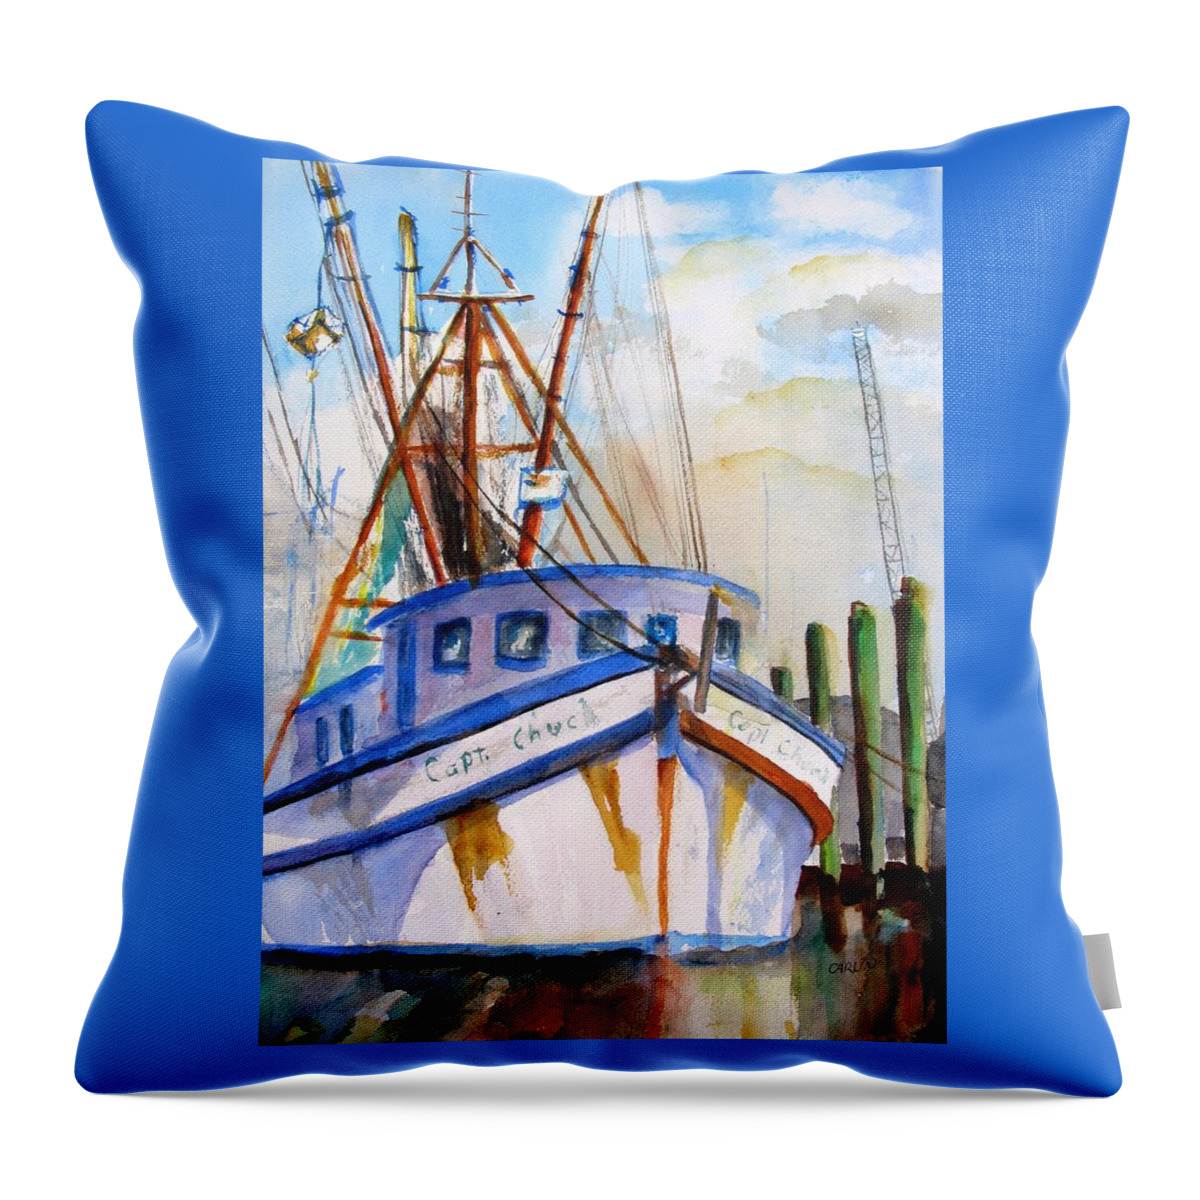 Boat Throw Pillow featuring the painting Shrimp Fishing Boat by Carlin Blahnik CarlinArtWatercolor